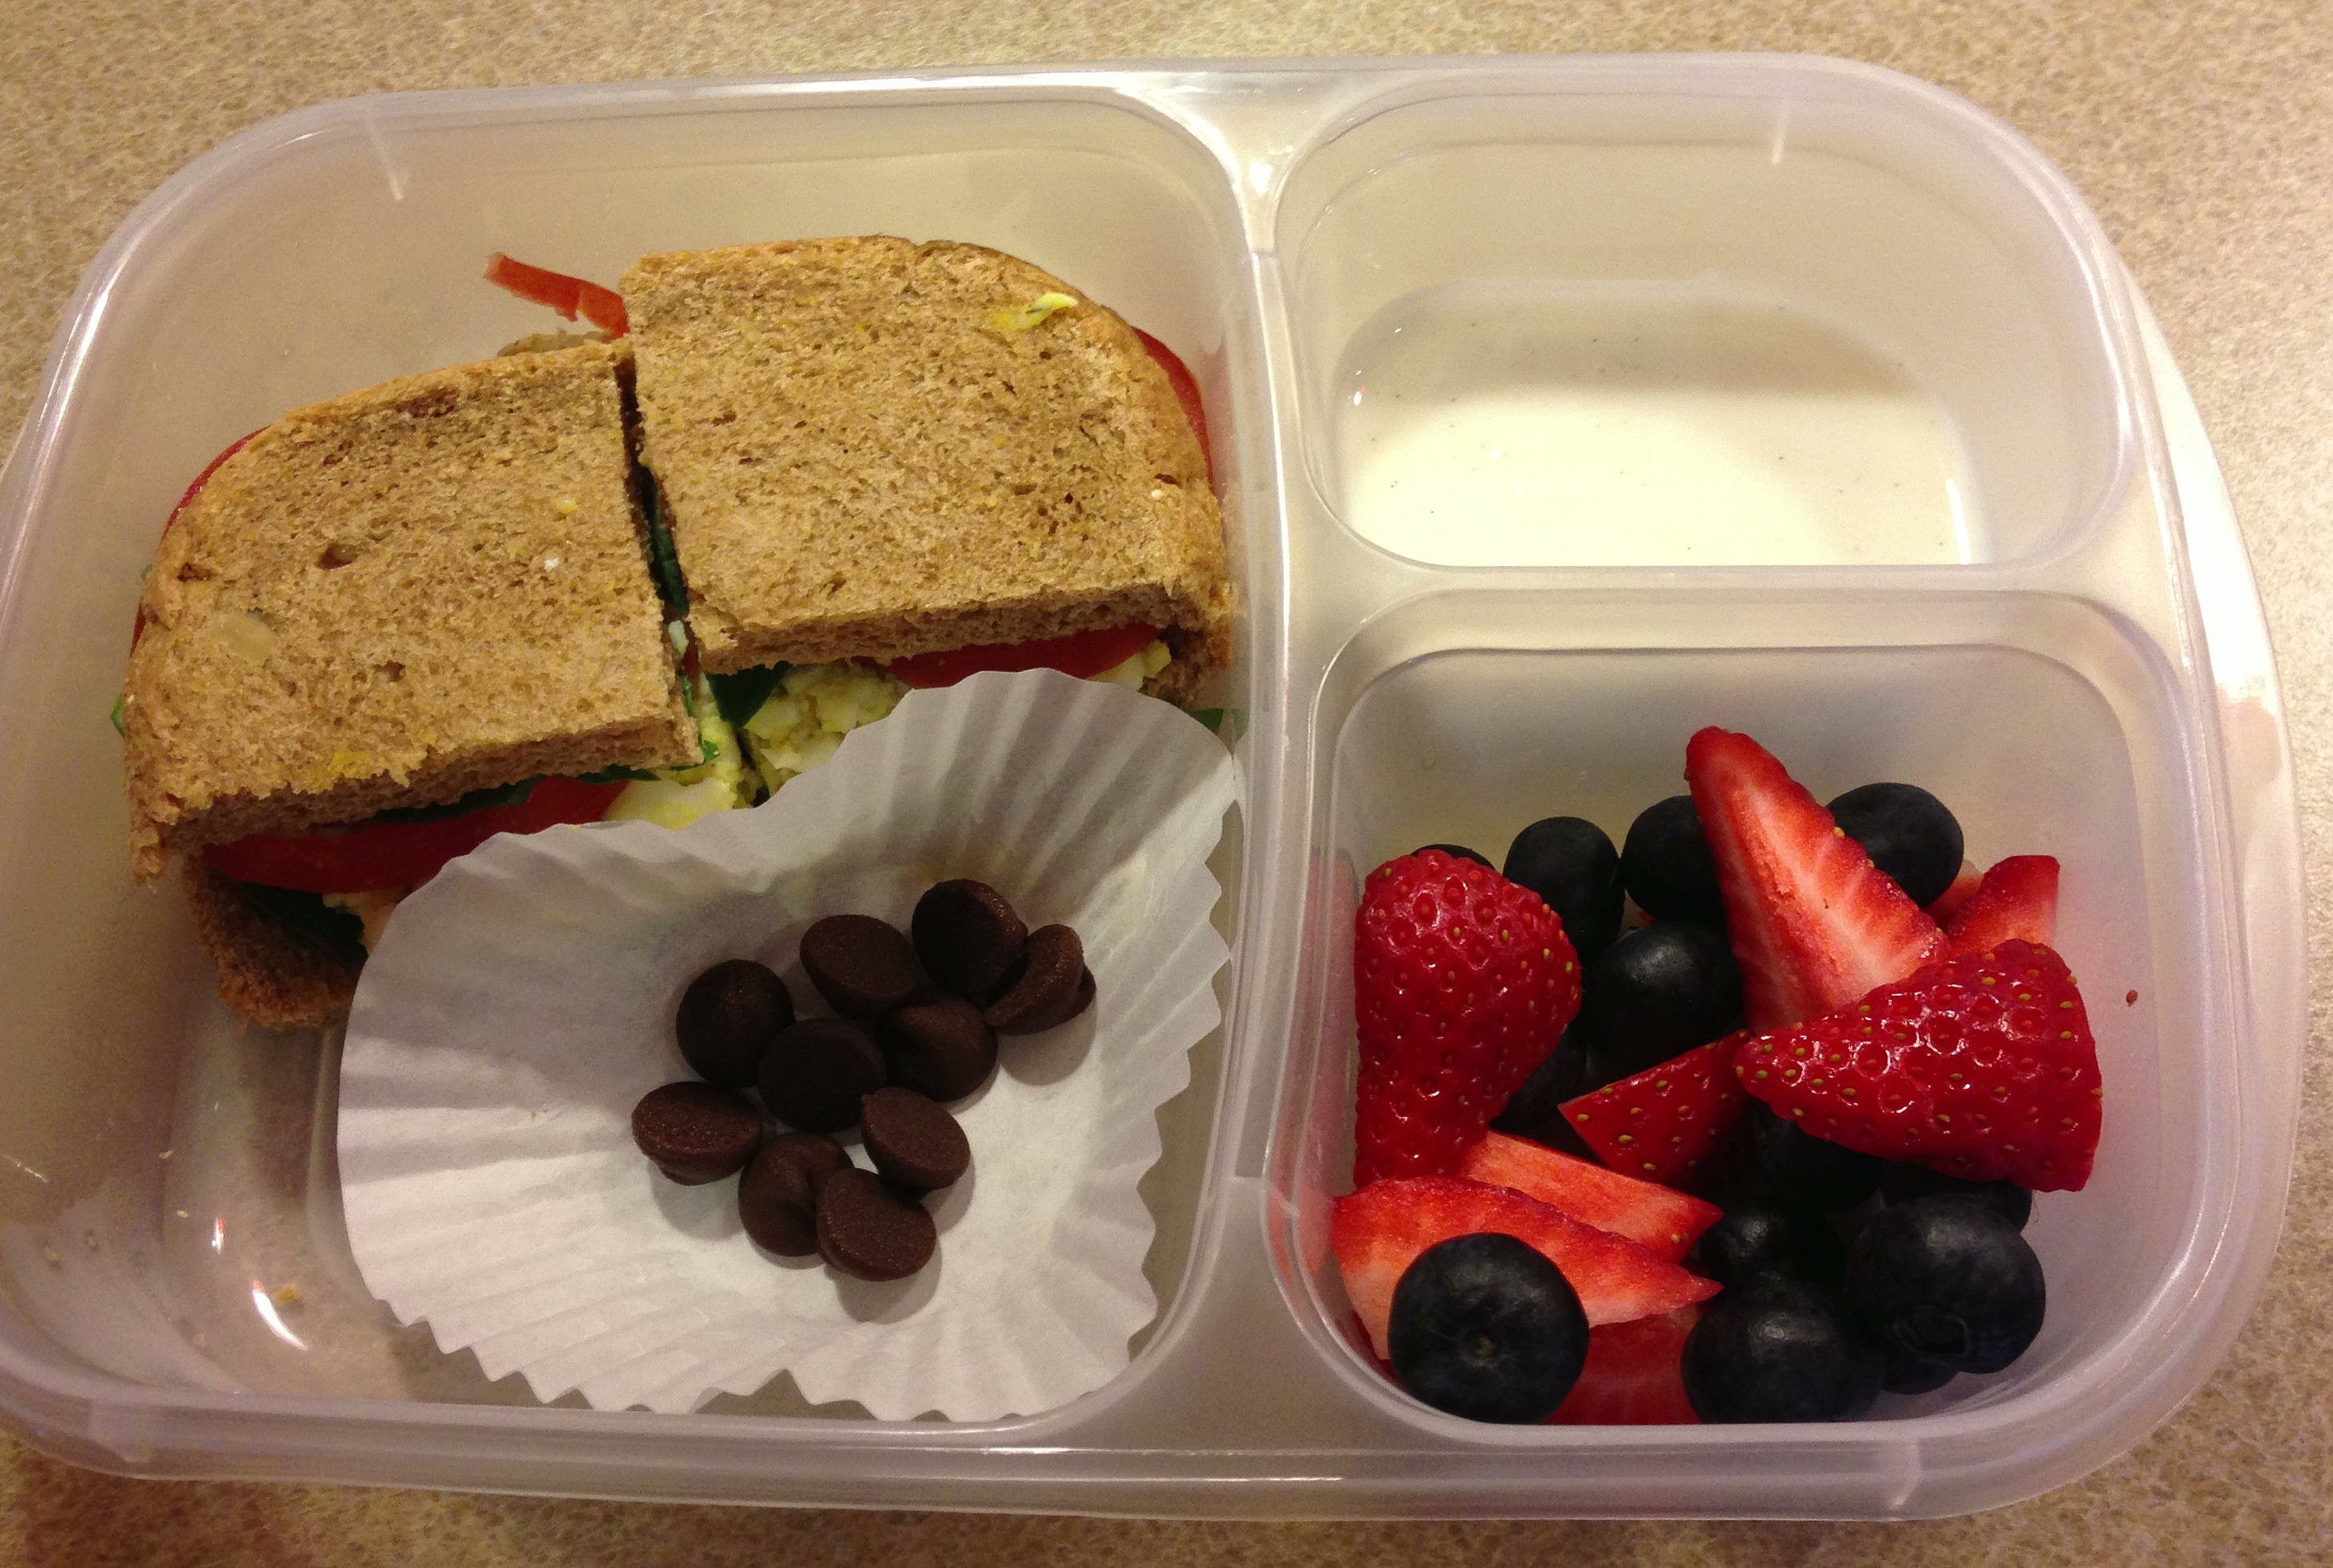 Egg salad on homemade multi-grain bread with spinach and tomatoes, strawberries and blueberries, vanilla bean yogurt and chocolate chips. All ingredients organic.